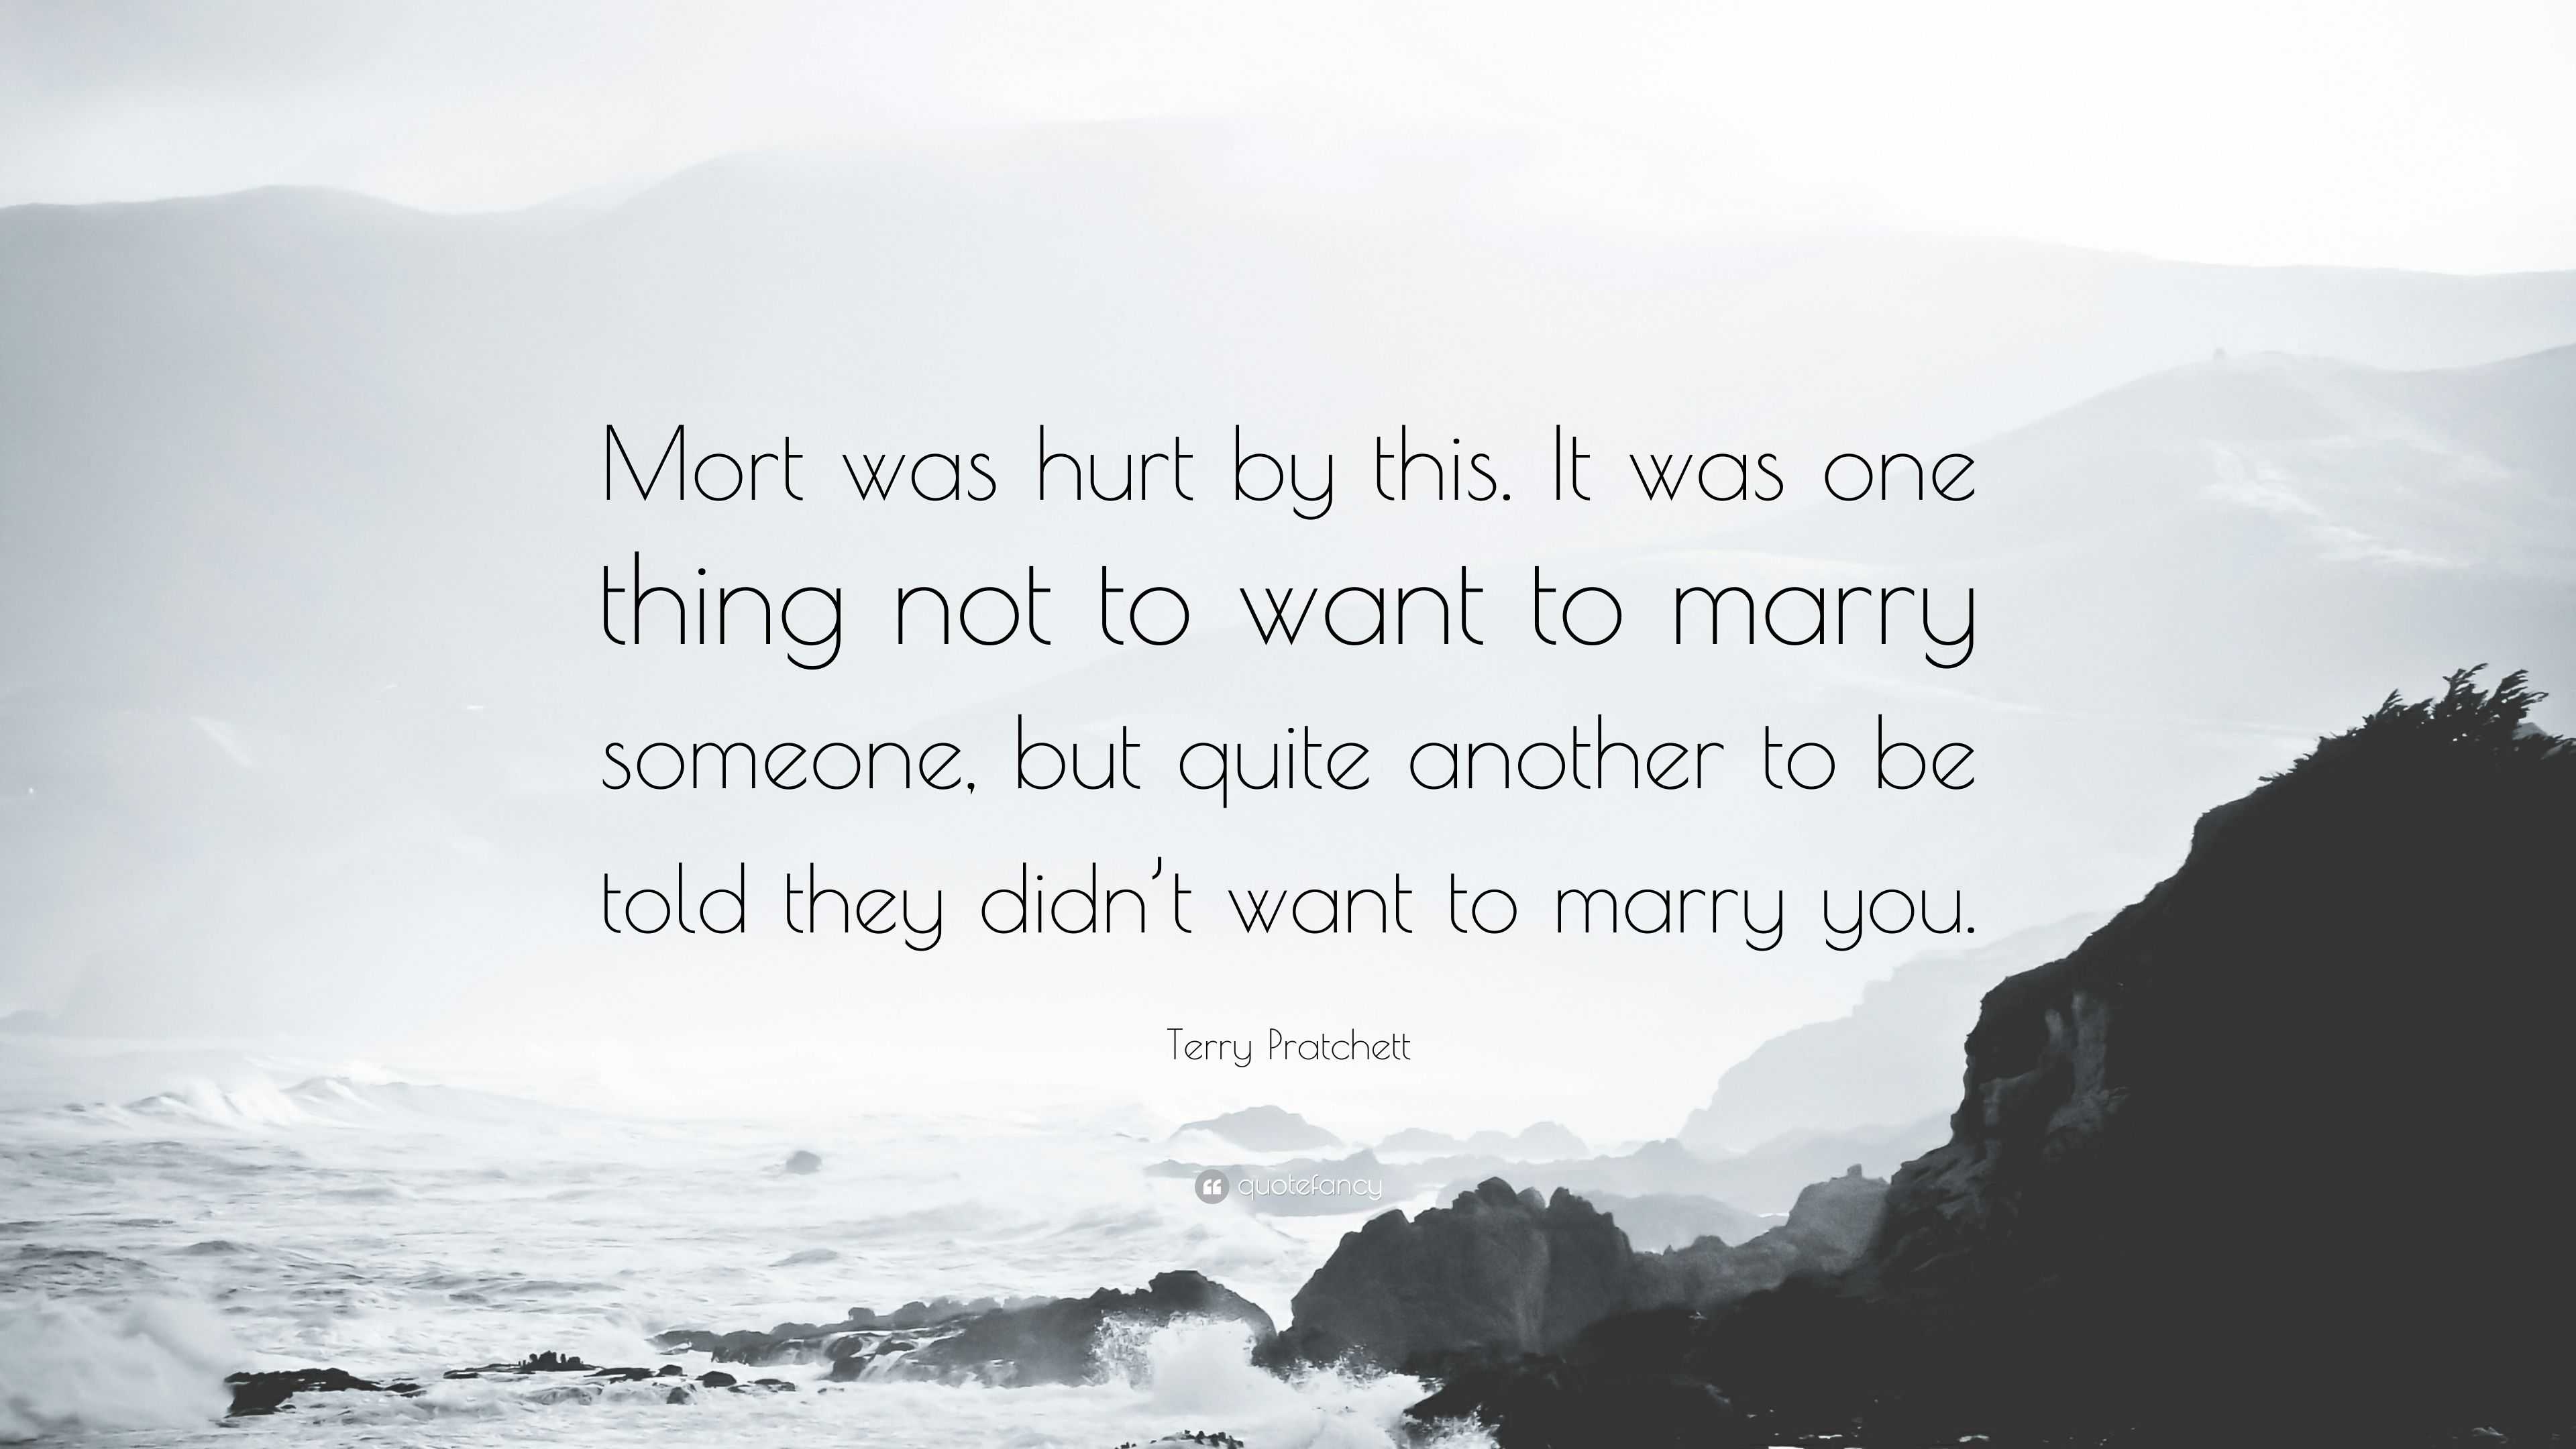 Terry Pratchett Quote: “Mort was hurt by this. It was one thing not to want  to marry someone, but quite another to be told they didn't want to m...”